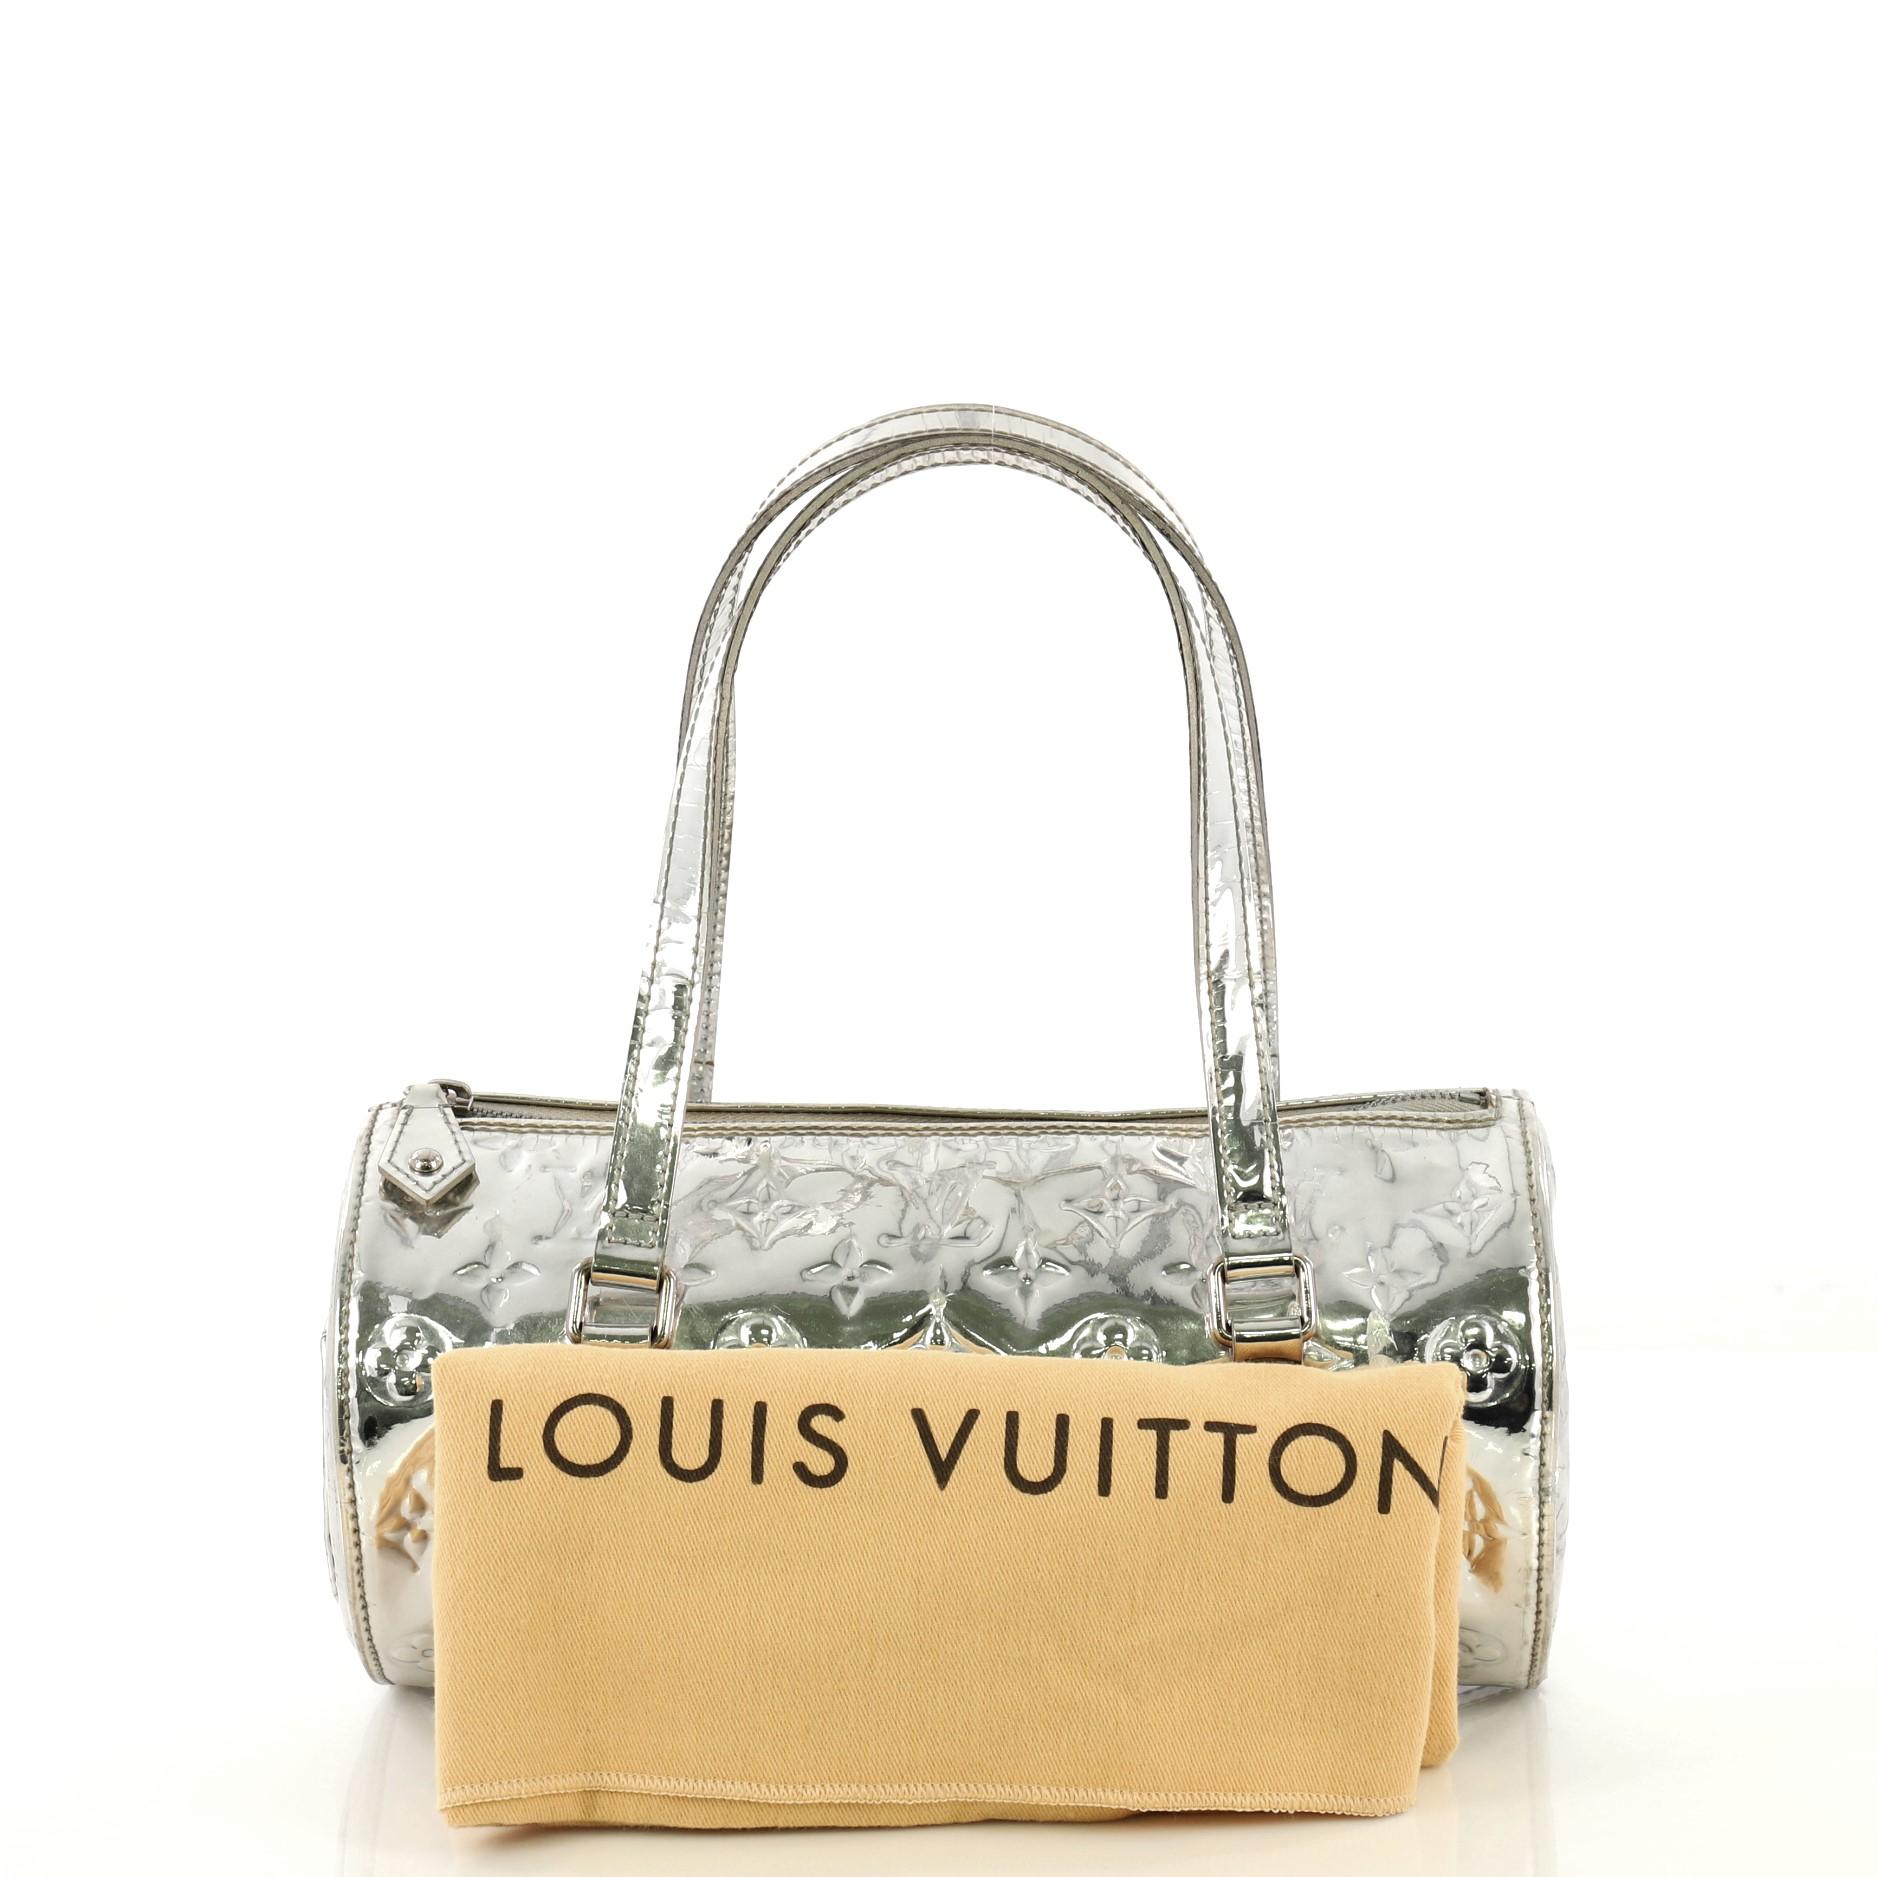 This Louis Vuitton Papillon Handbag Miroir PVC 26, crafted from silver miroir PVC, features dual flat handles, exterior side slip pocket, and silver-tone hardware. Its zip closure opens to a gray fabric interior. Authenticity code reads: MB1006.